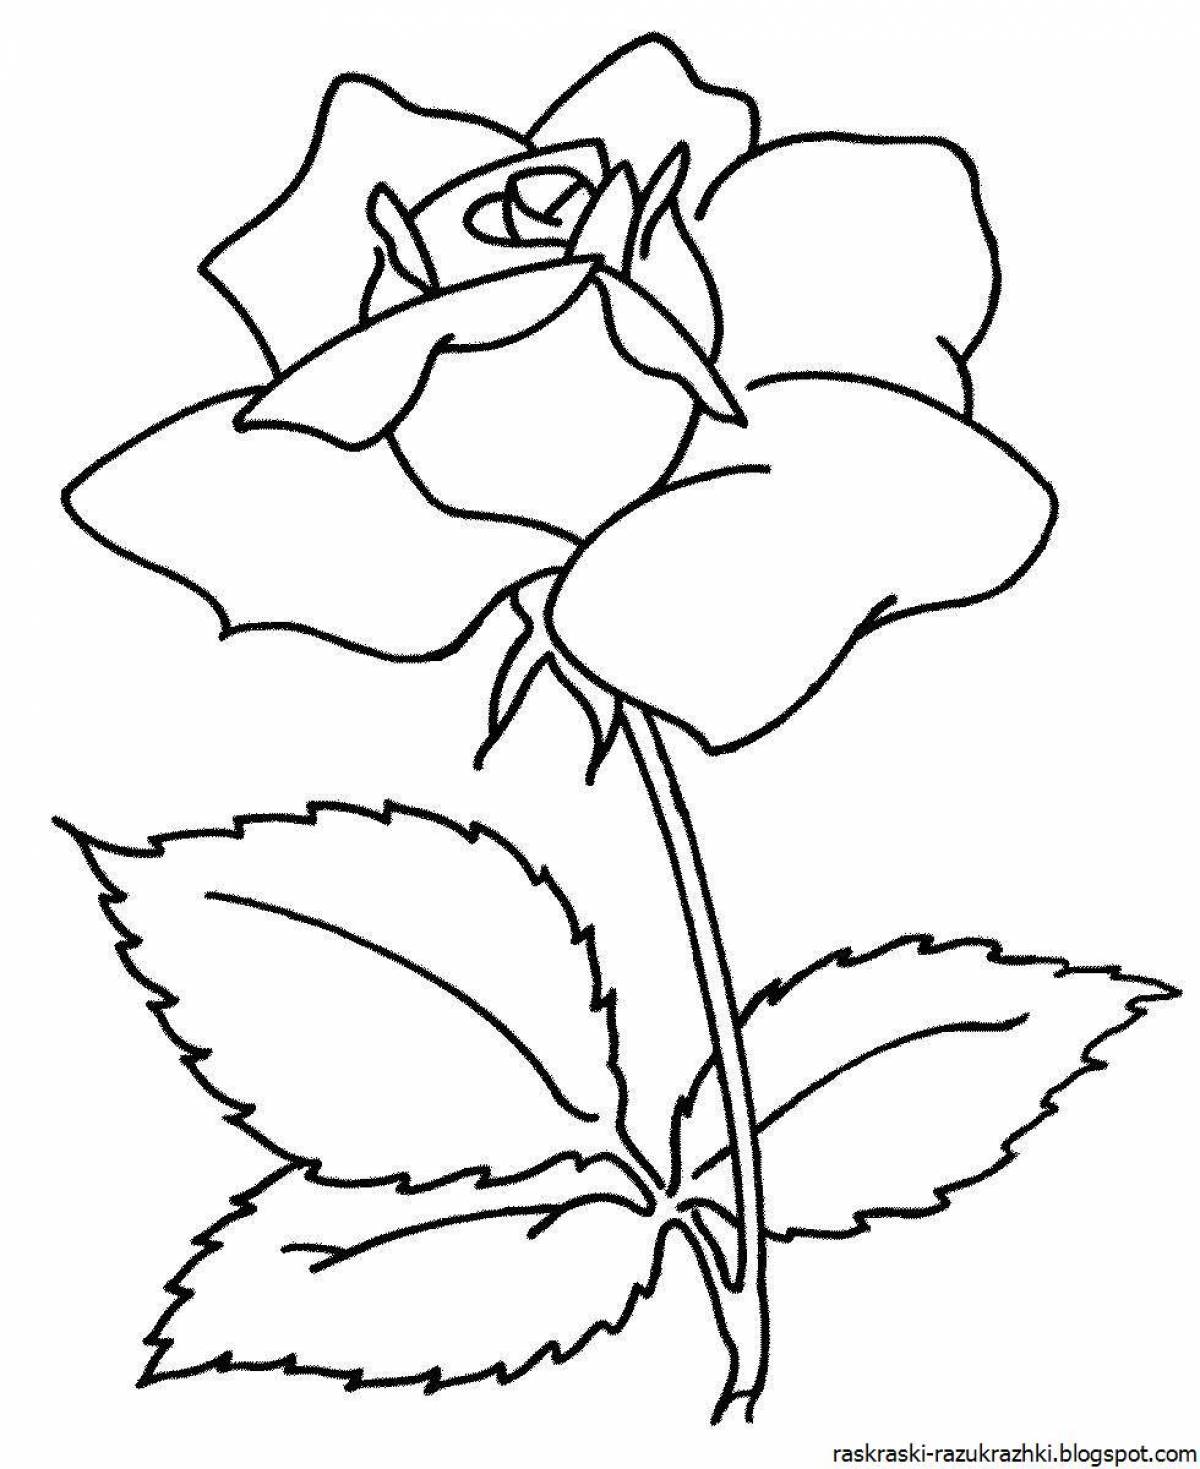 Inspirational flowers coloring book for 4-5 year olds